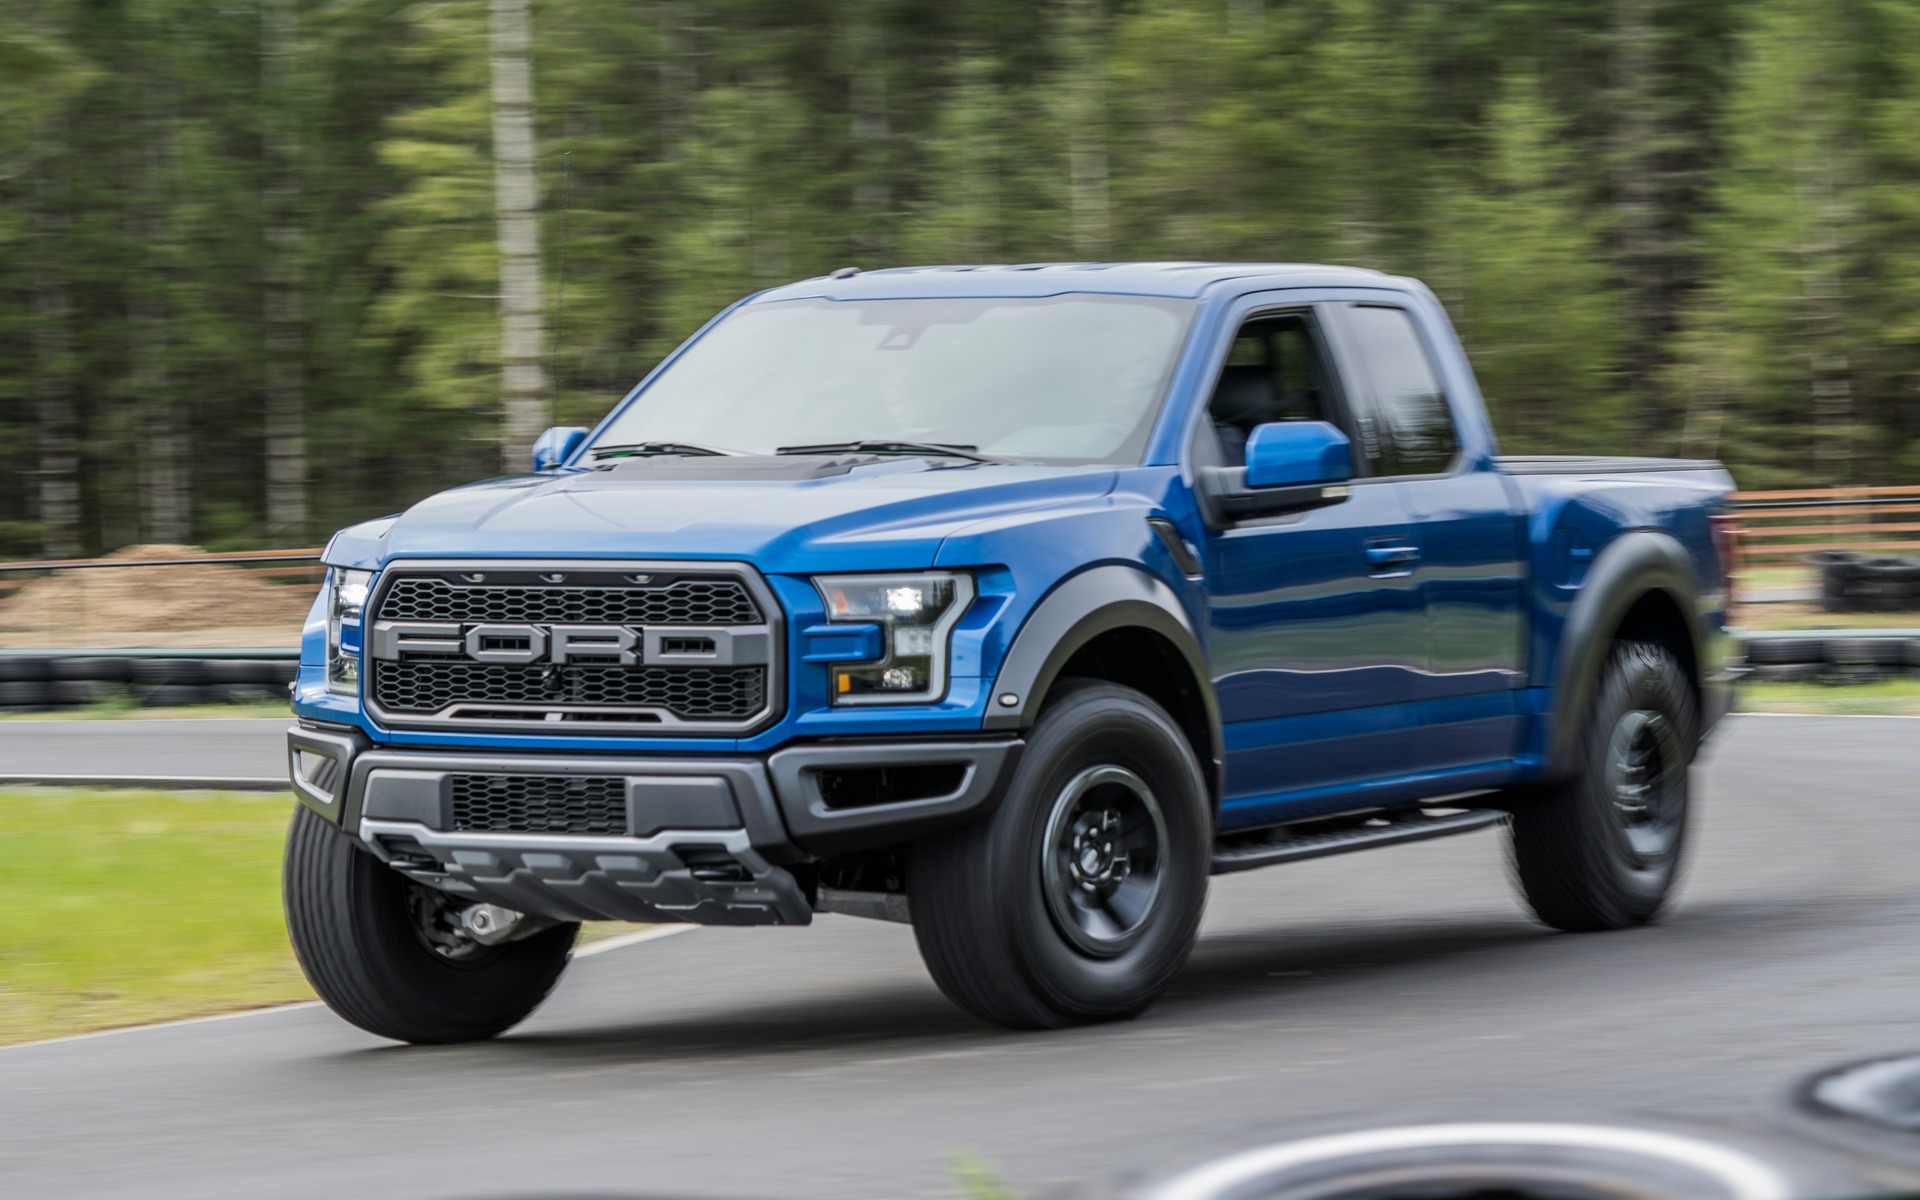 Top 10 Bestselling Trucks and SUVs in Canada, First Half of 2019 1/11